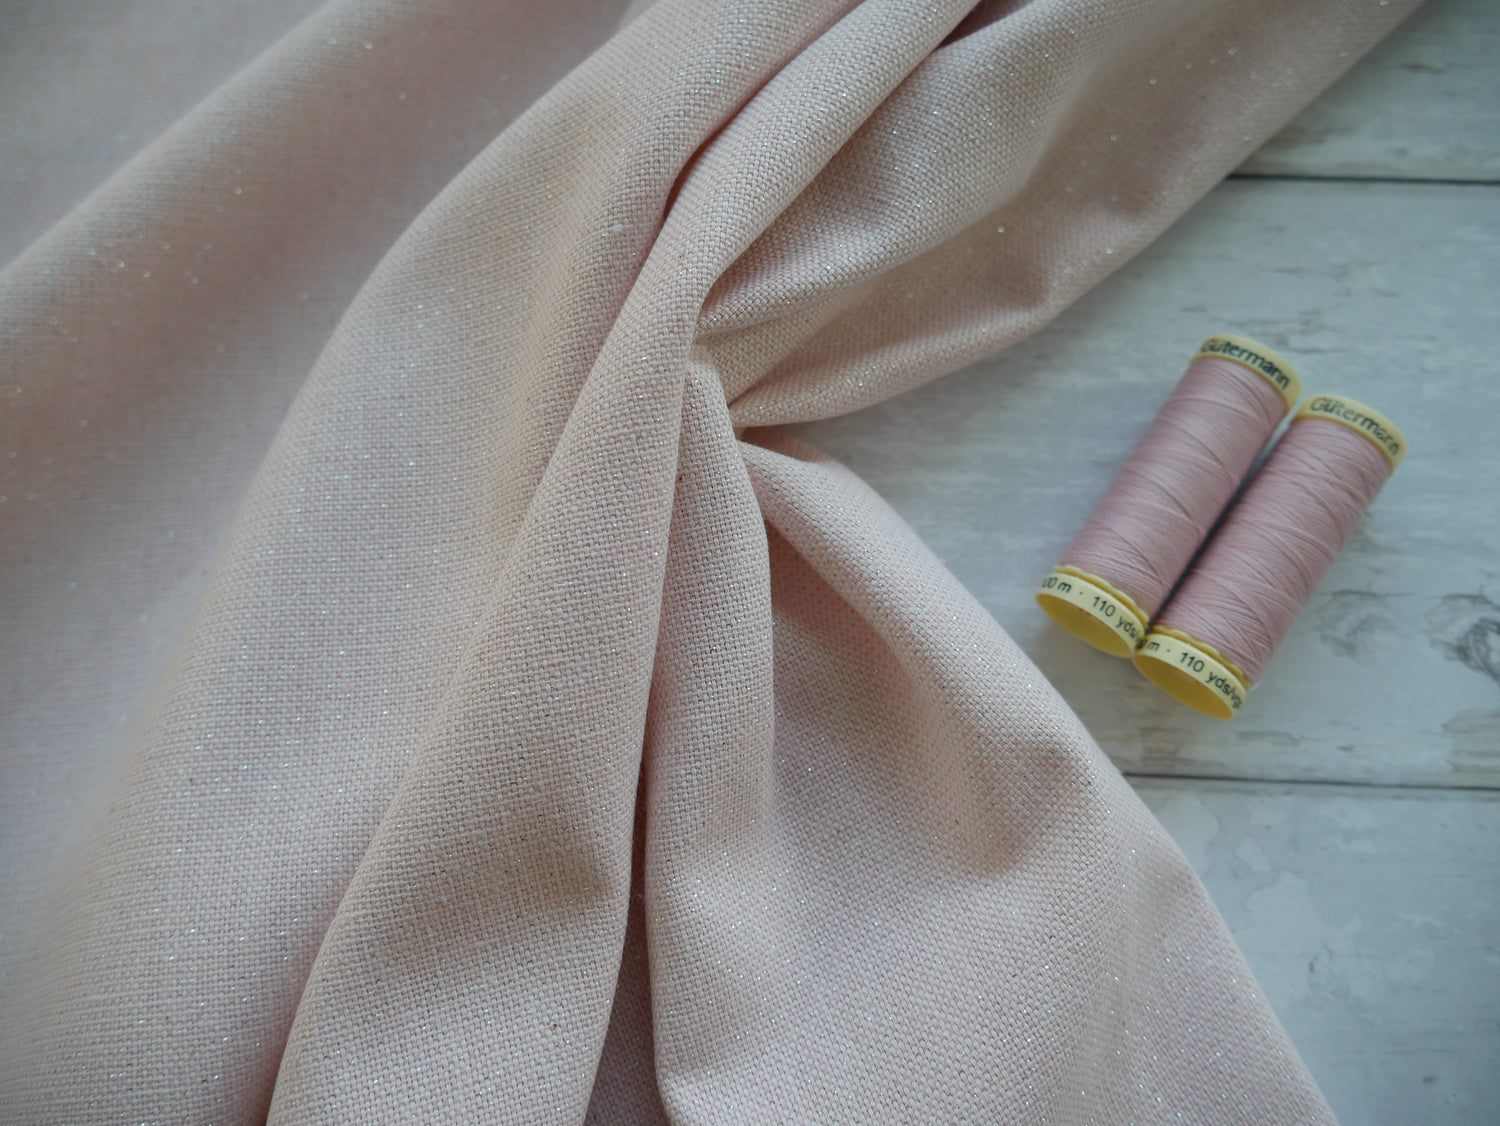 Linen-Look Half Panama with Sparkle - Pink £10.50 p/m-Fabric-Flying Bobbins Haberdashery